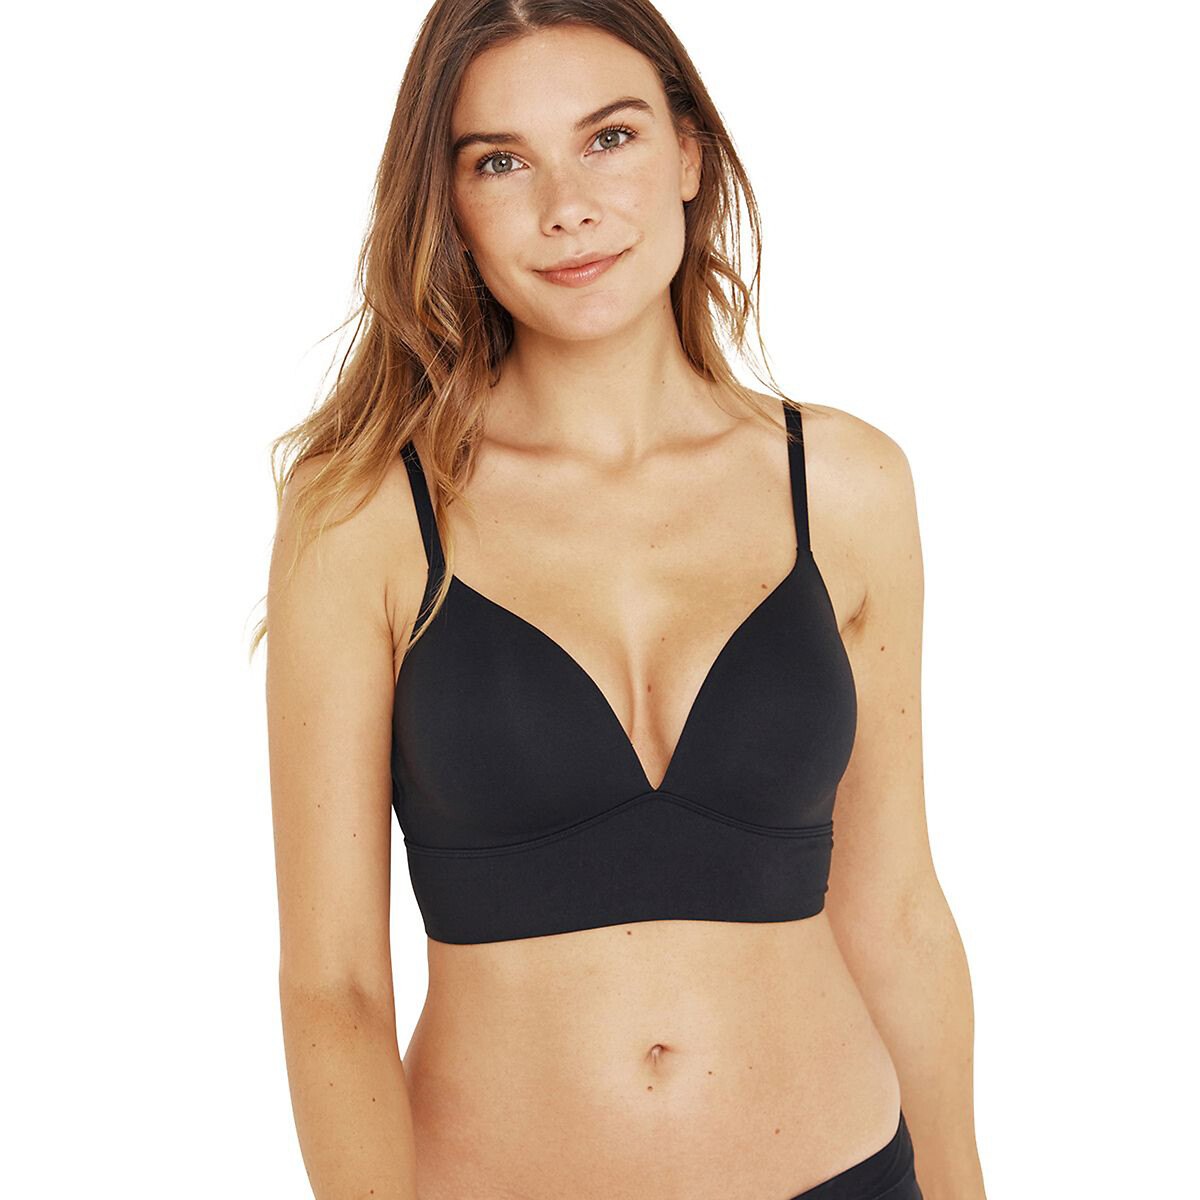 Image of Non-Underwired Bustier Bra with a Second Skin Feel